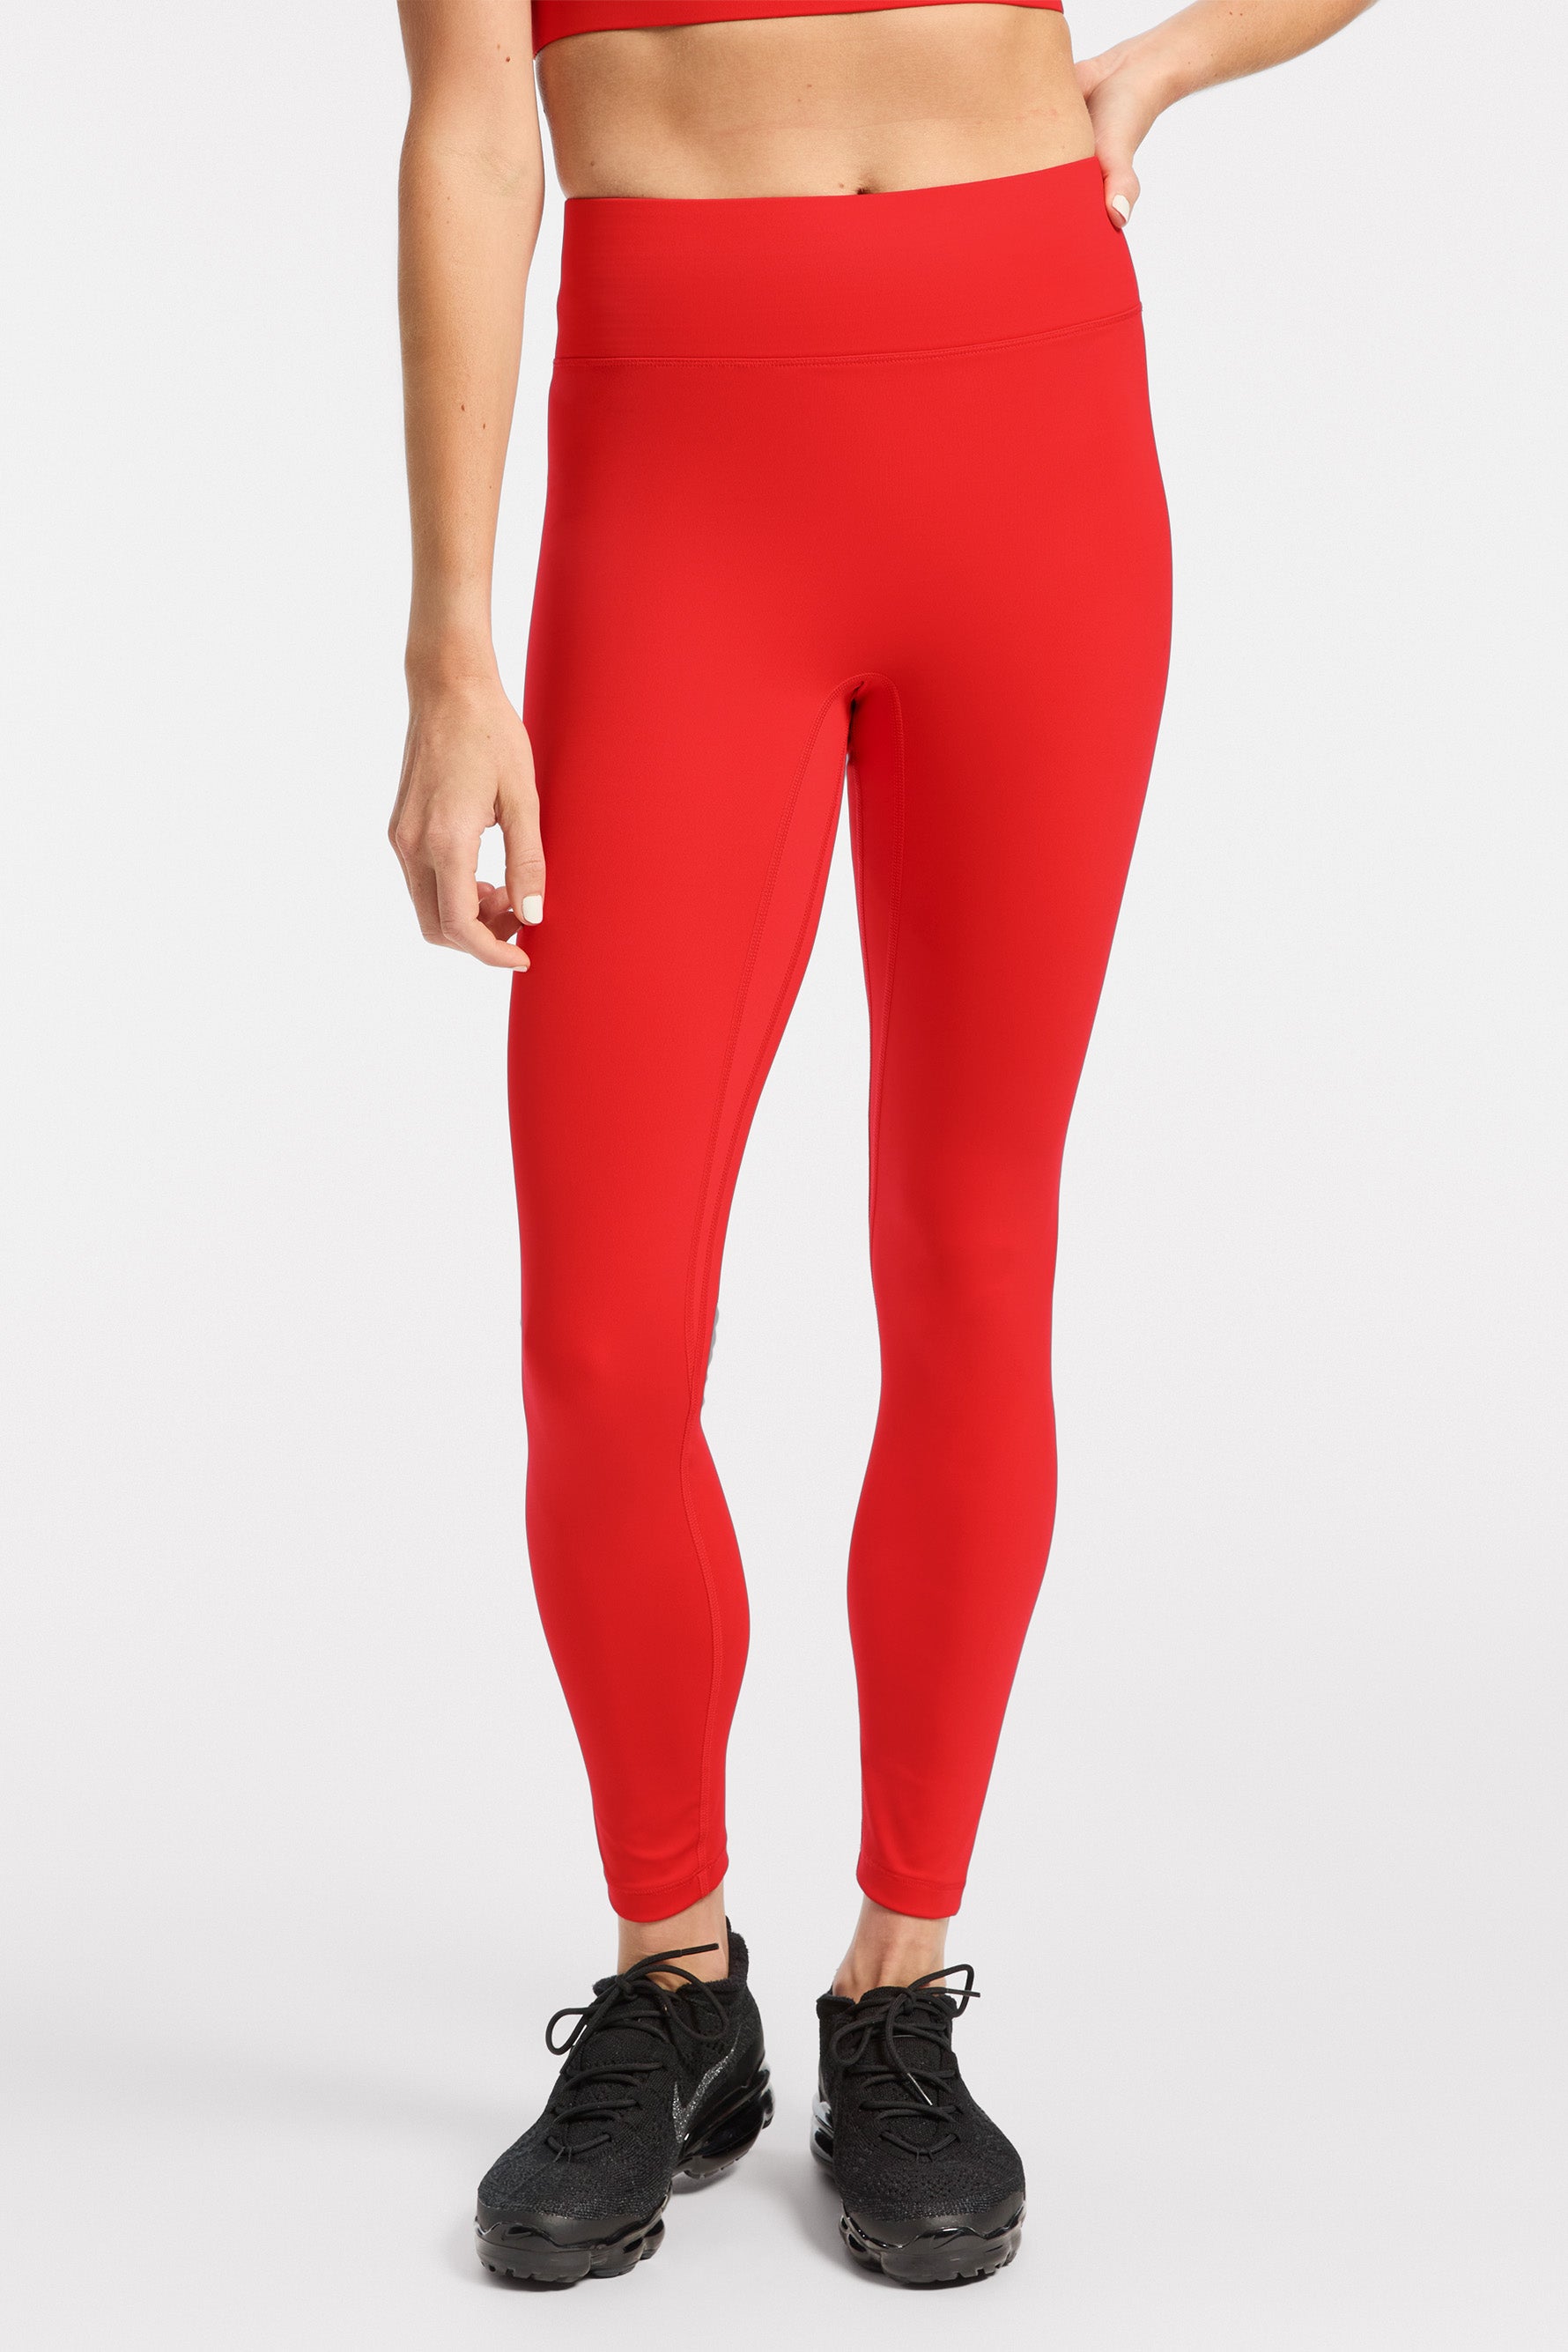 Freddy leggings for gym and spare time: online store Red